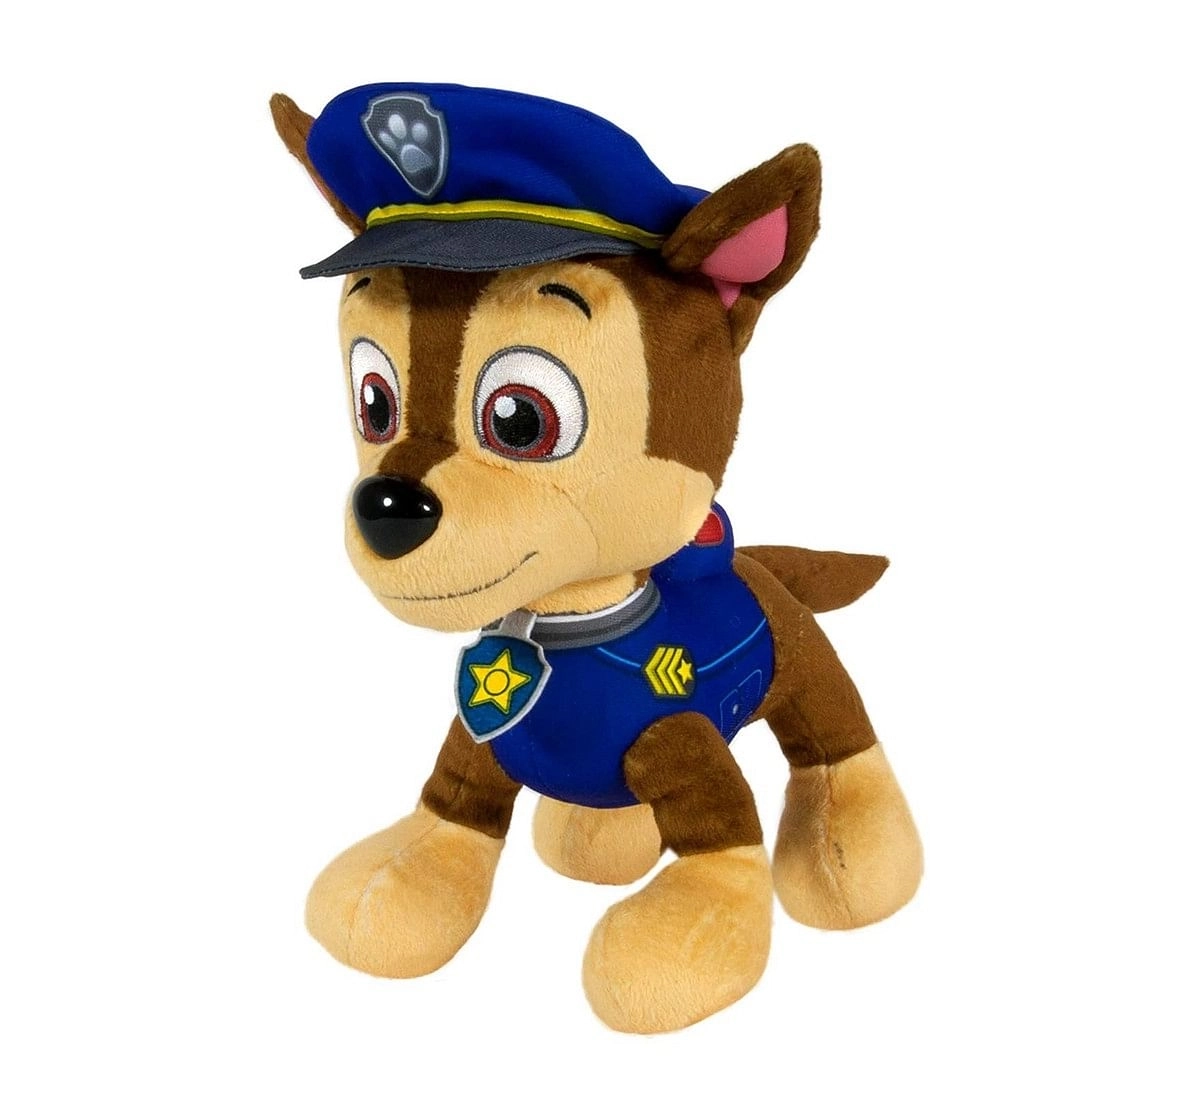  Paw Patrol 10 Inch Plush Chase Character Soft Toys for Kids age 3Y+ - 13.5128 Cm 